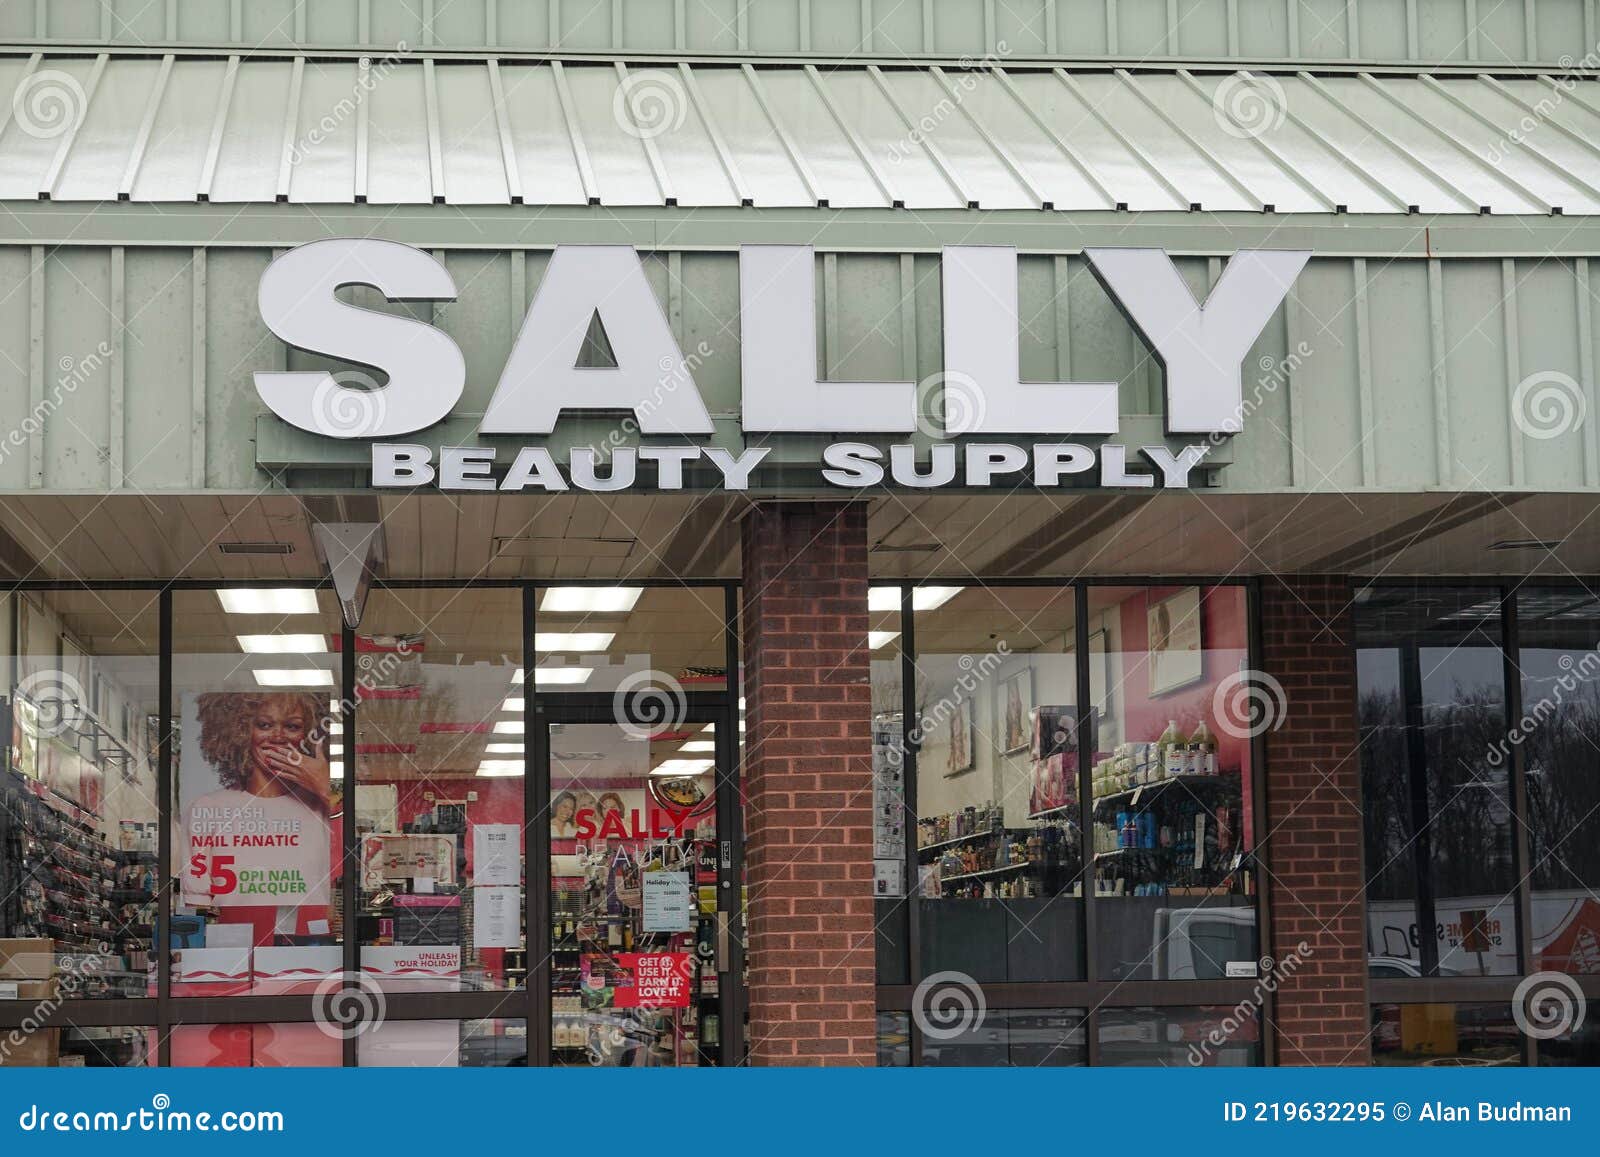 Beauty Supply Store - wide 1